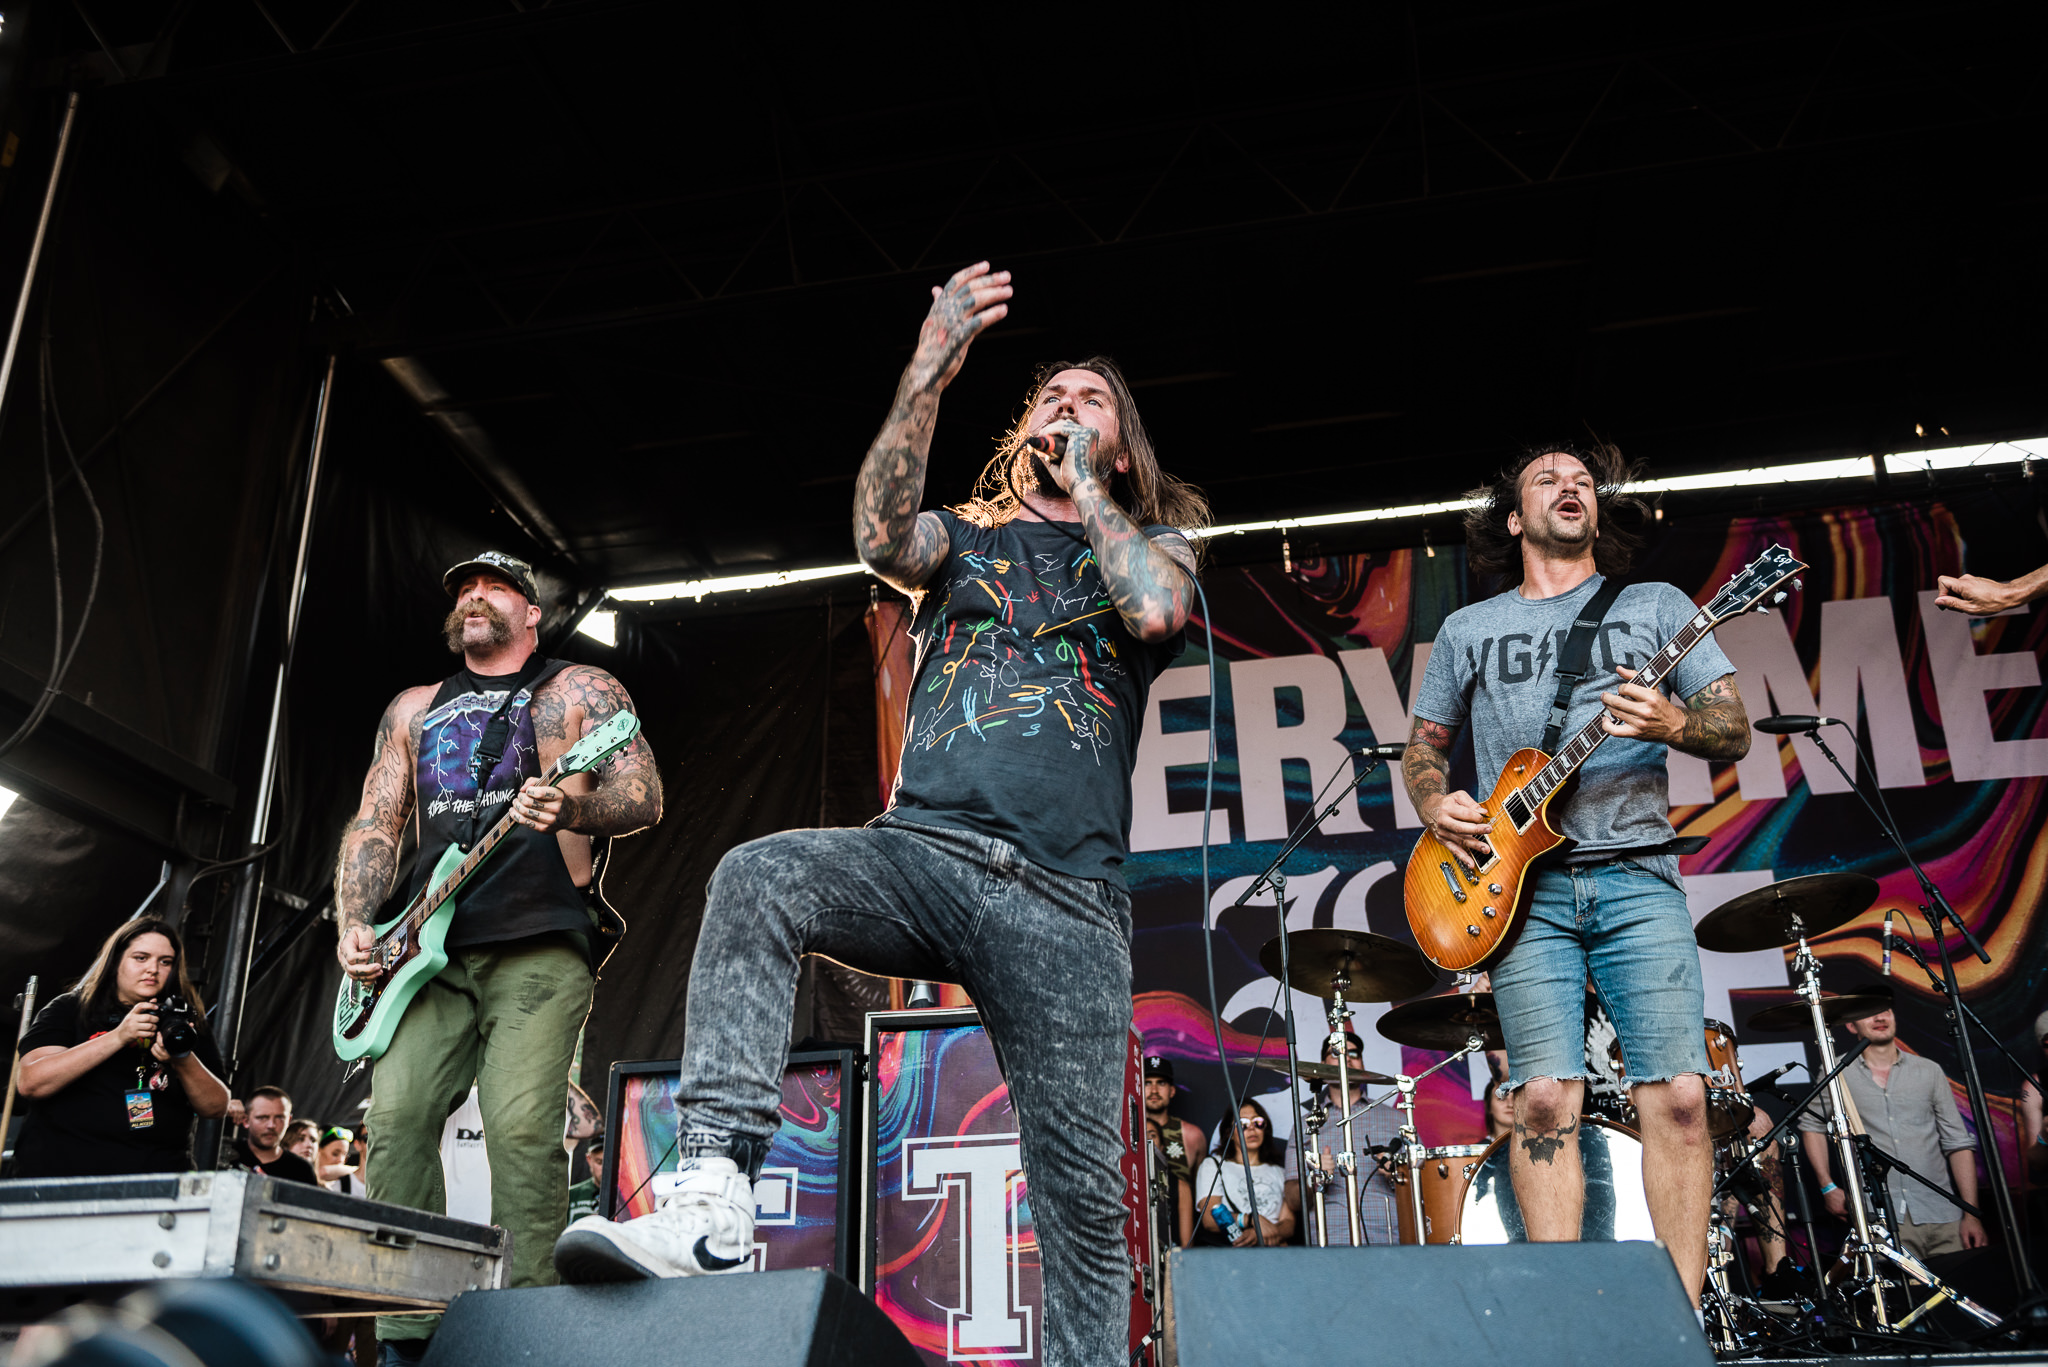 Every Time I Die Warped Tour 2018 PNC Bank Arts Center Holmdel NJ Stars and Scars Photo